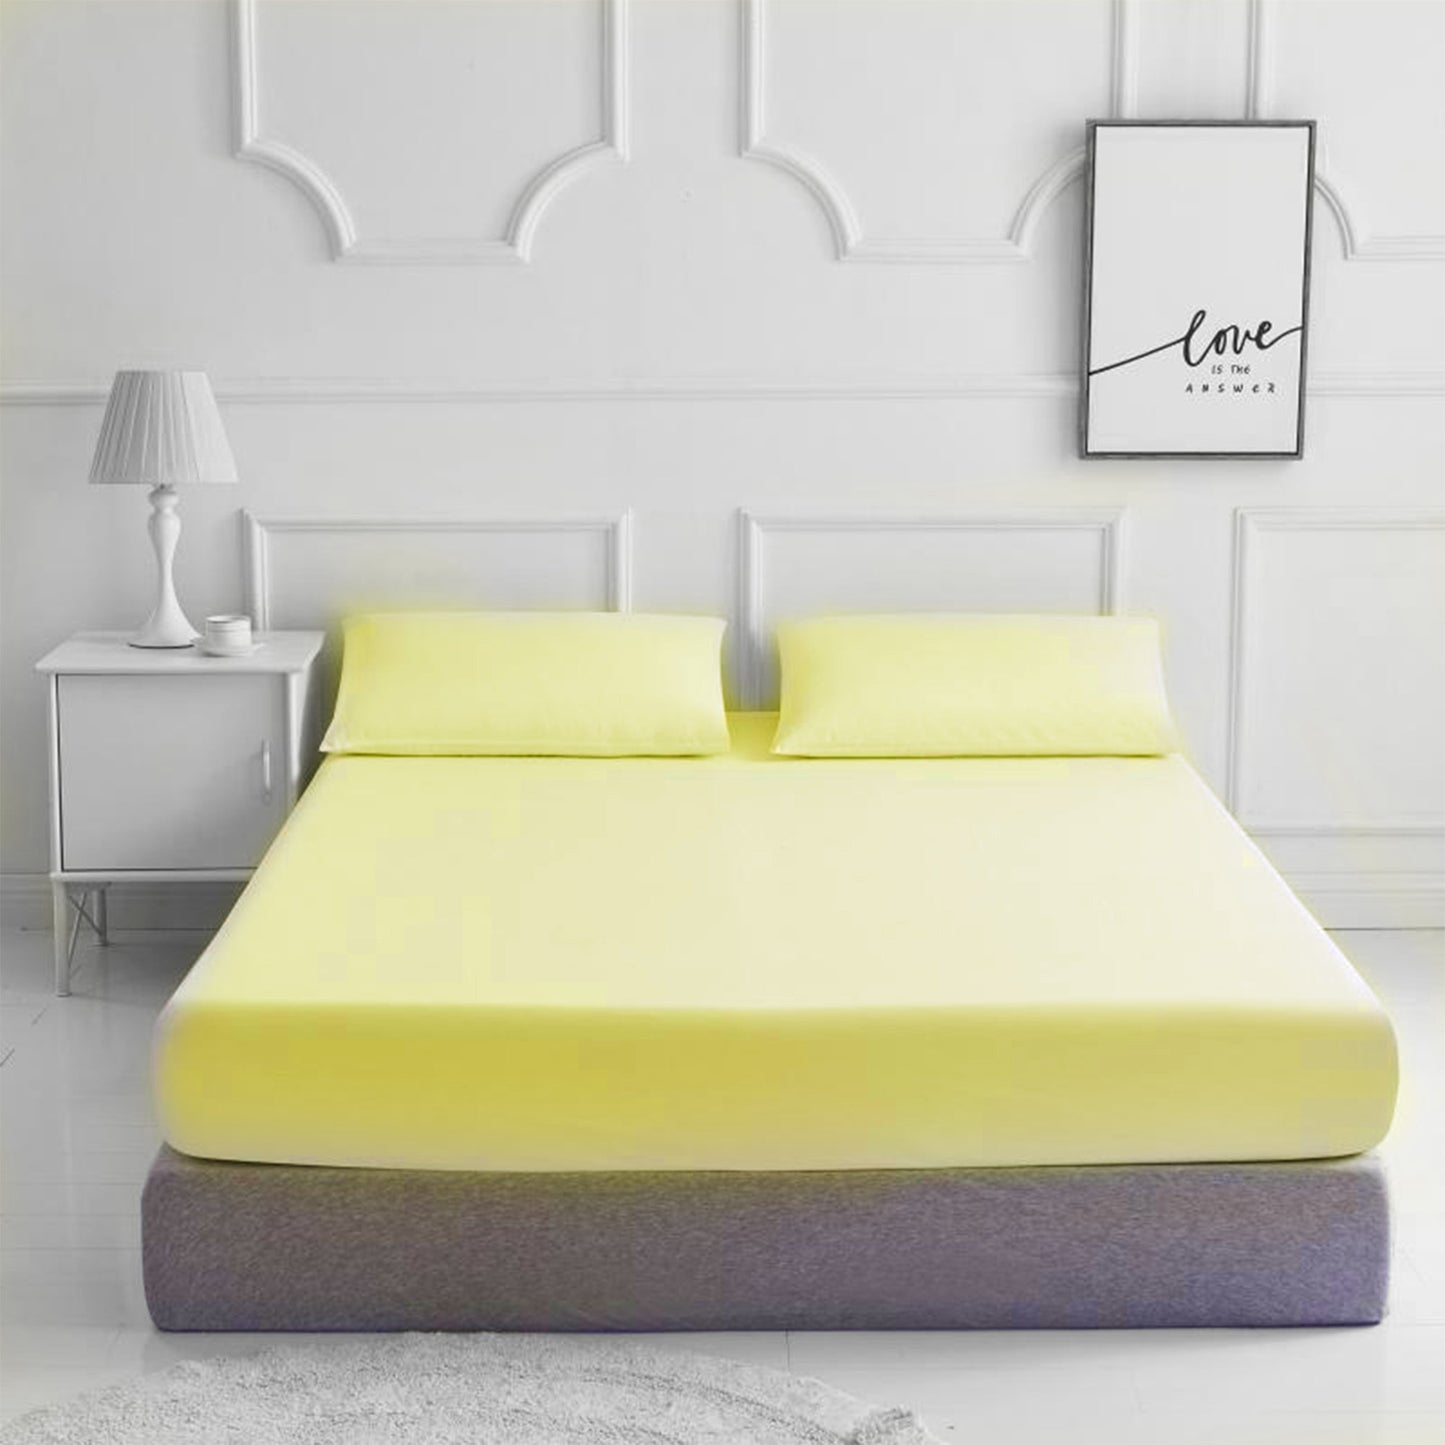 Fitted Bed Sheet Matching FREE 2 X PILLOW CASE Plain Dyed - TheComfortshop.co.ukBed Sheets0721718963646thecomfortshopTheComfortshop.co.ukPC FIT FREE PP Lemon KingLemonKingFitted Bed Sheet Matching FREE 2 X PILLOW CASE Plain Dyed - TheComfortshop.co.uk